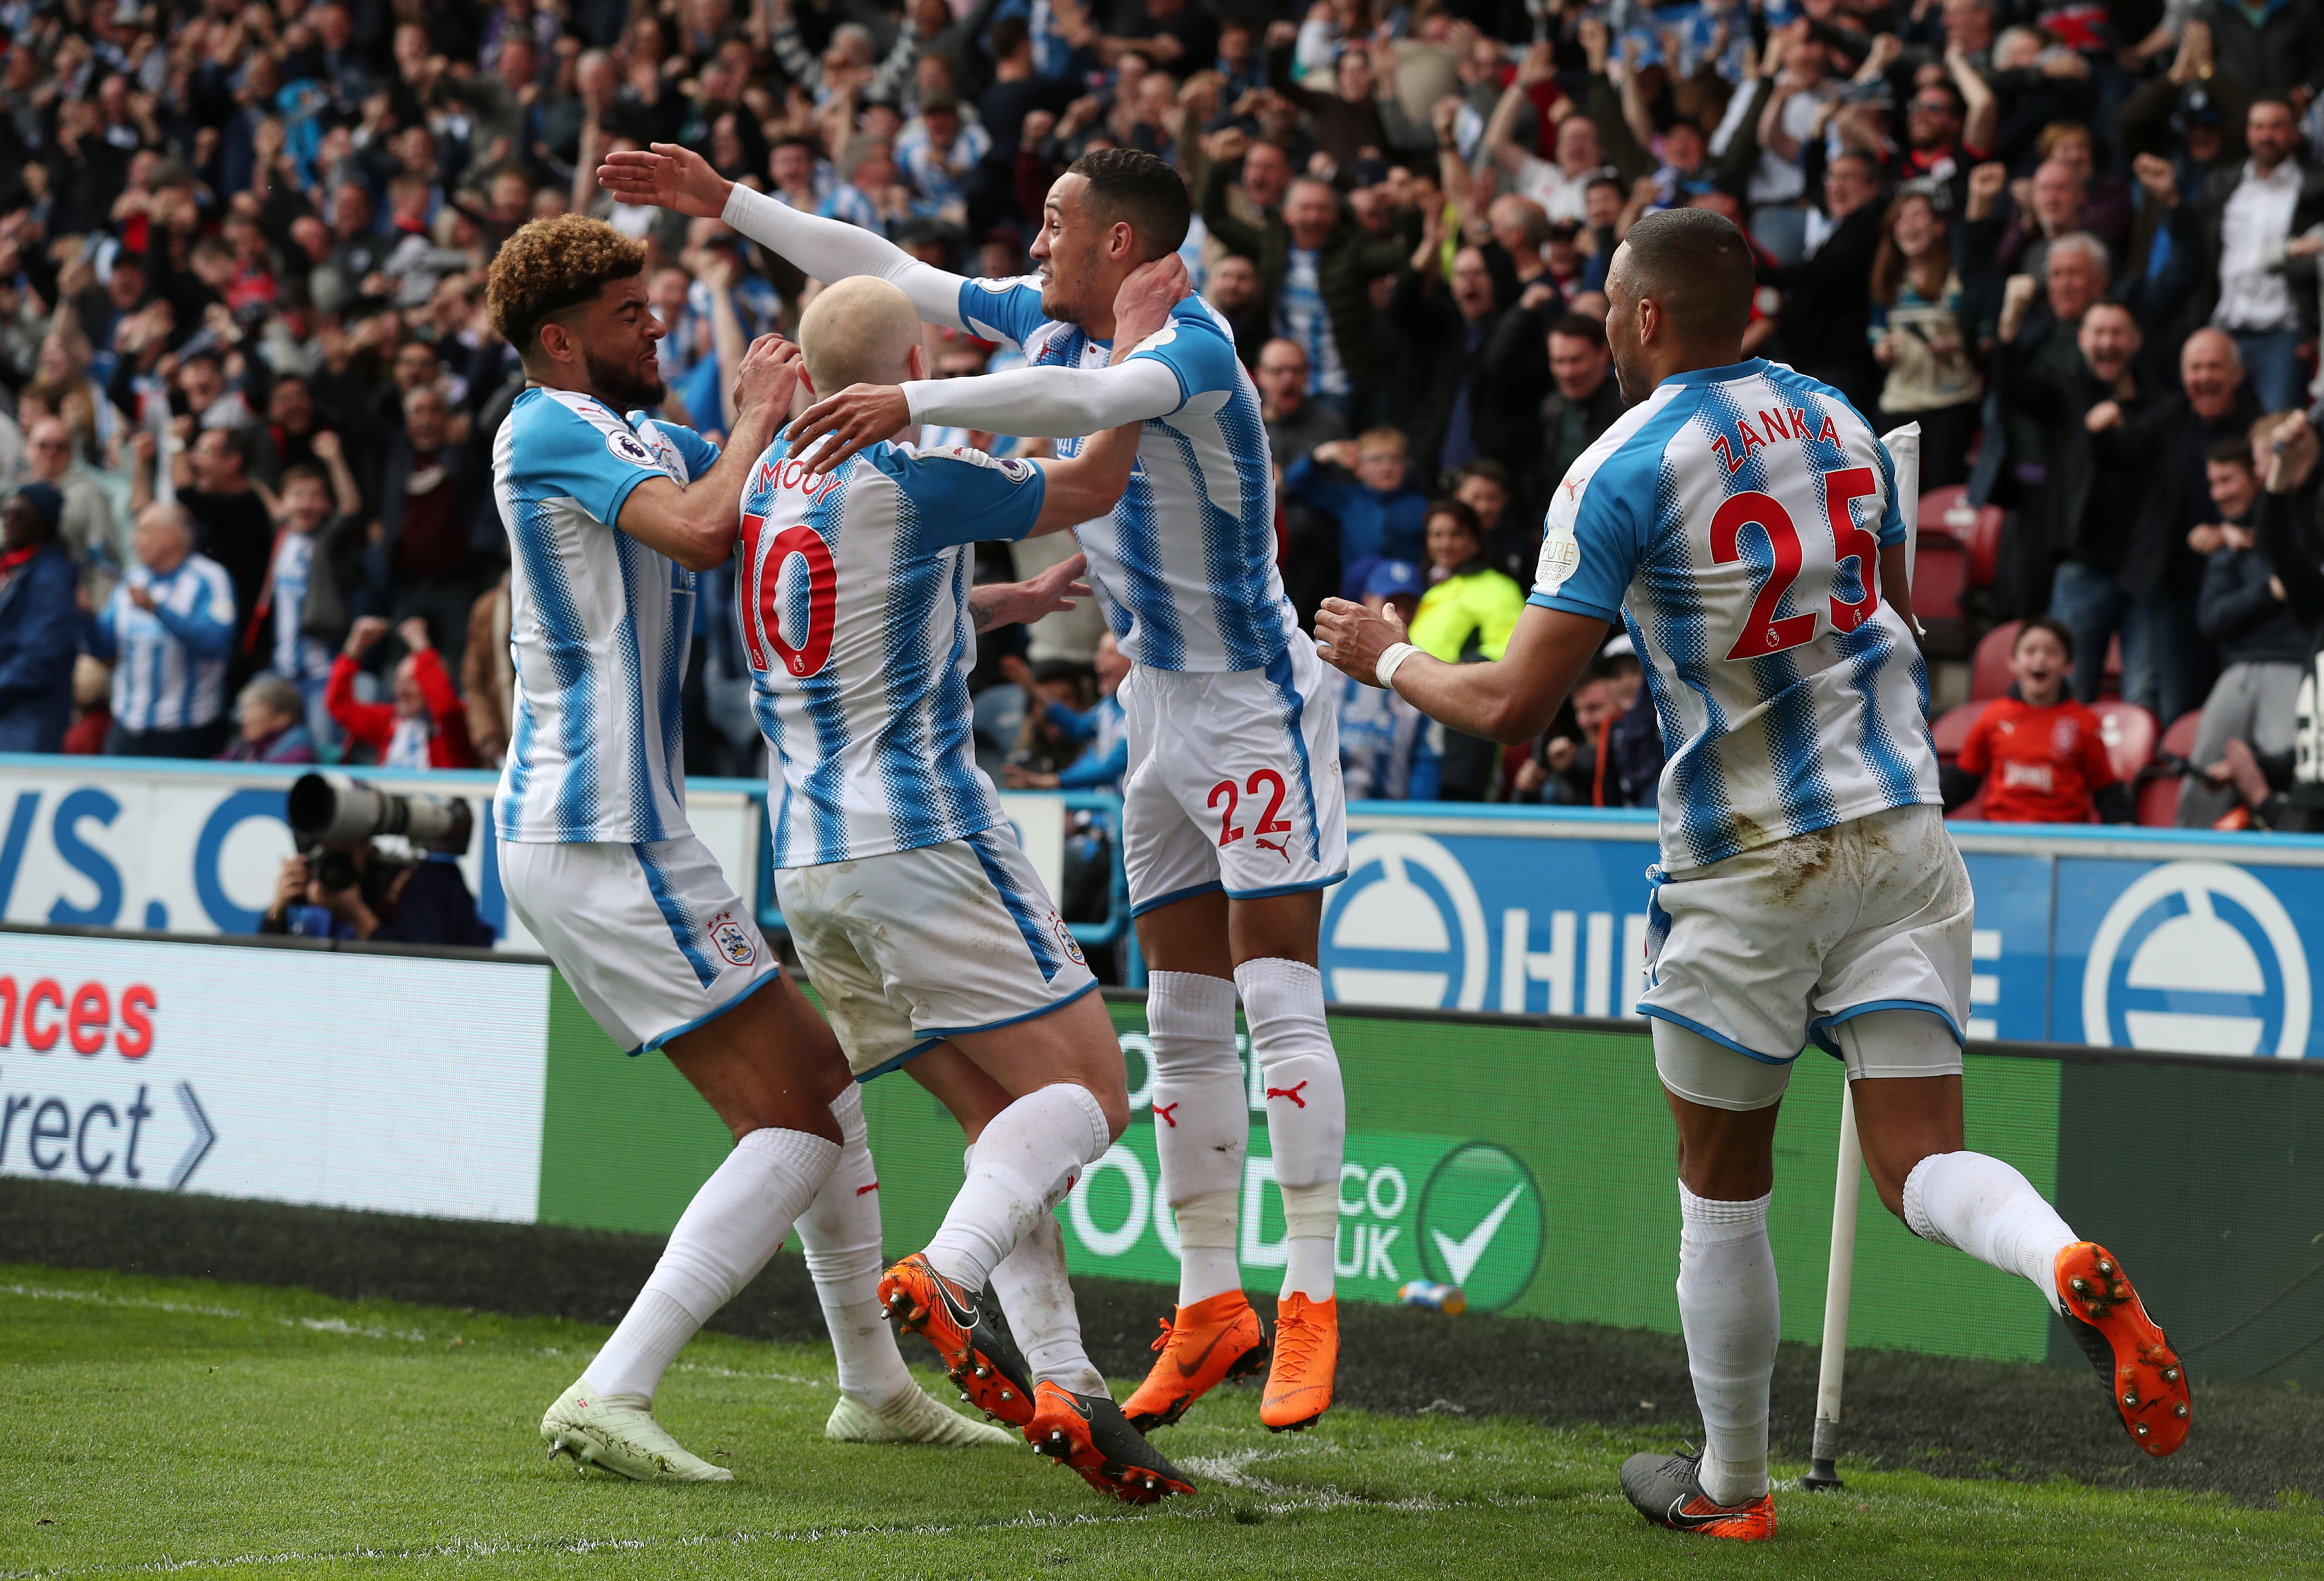 Football: Ince late strike secures vital win for Huddersfield